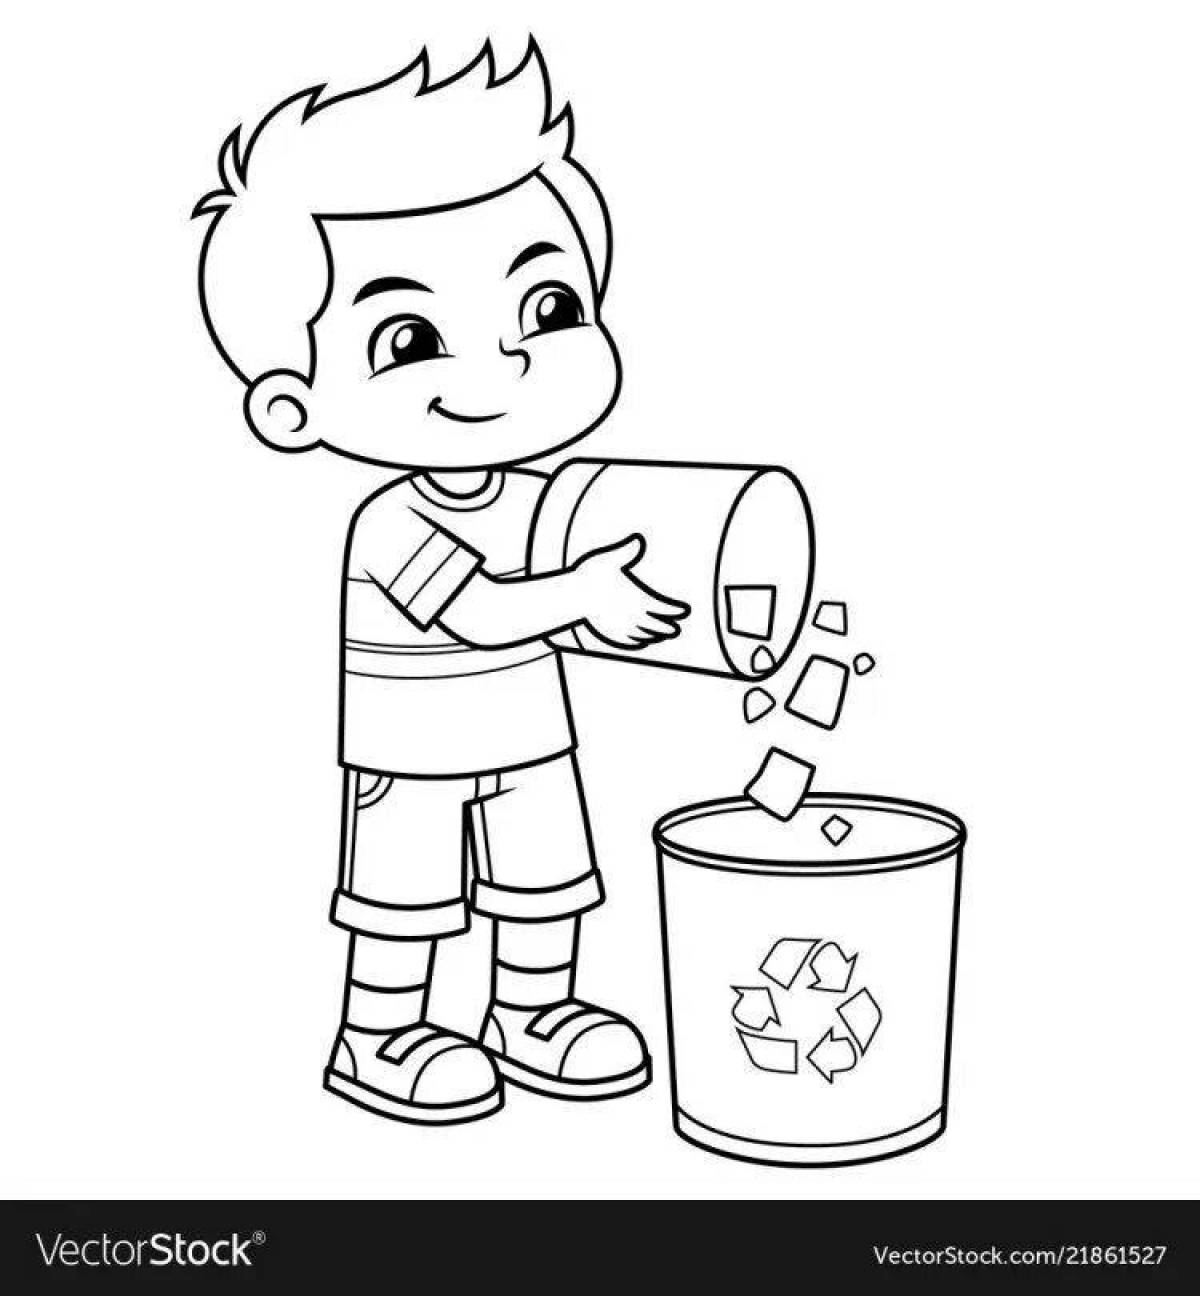 Intricate garbage coloring page